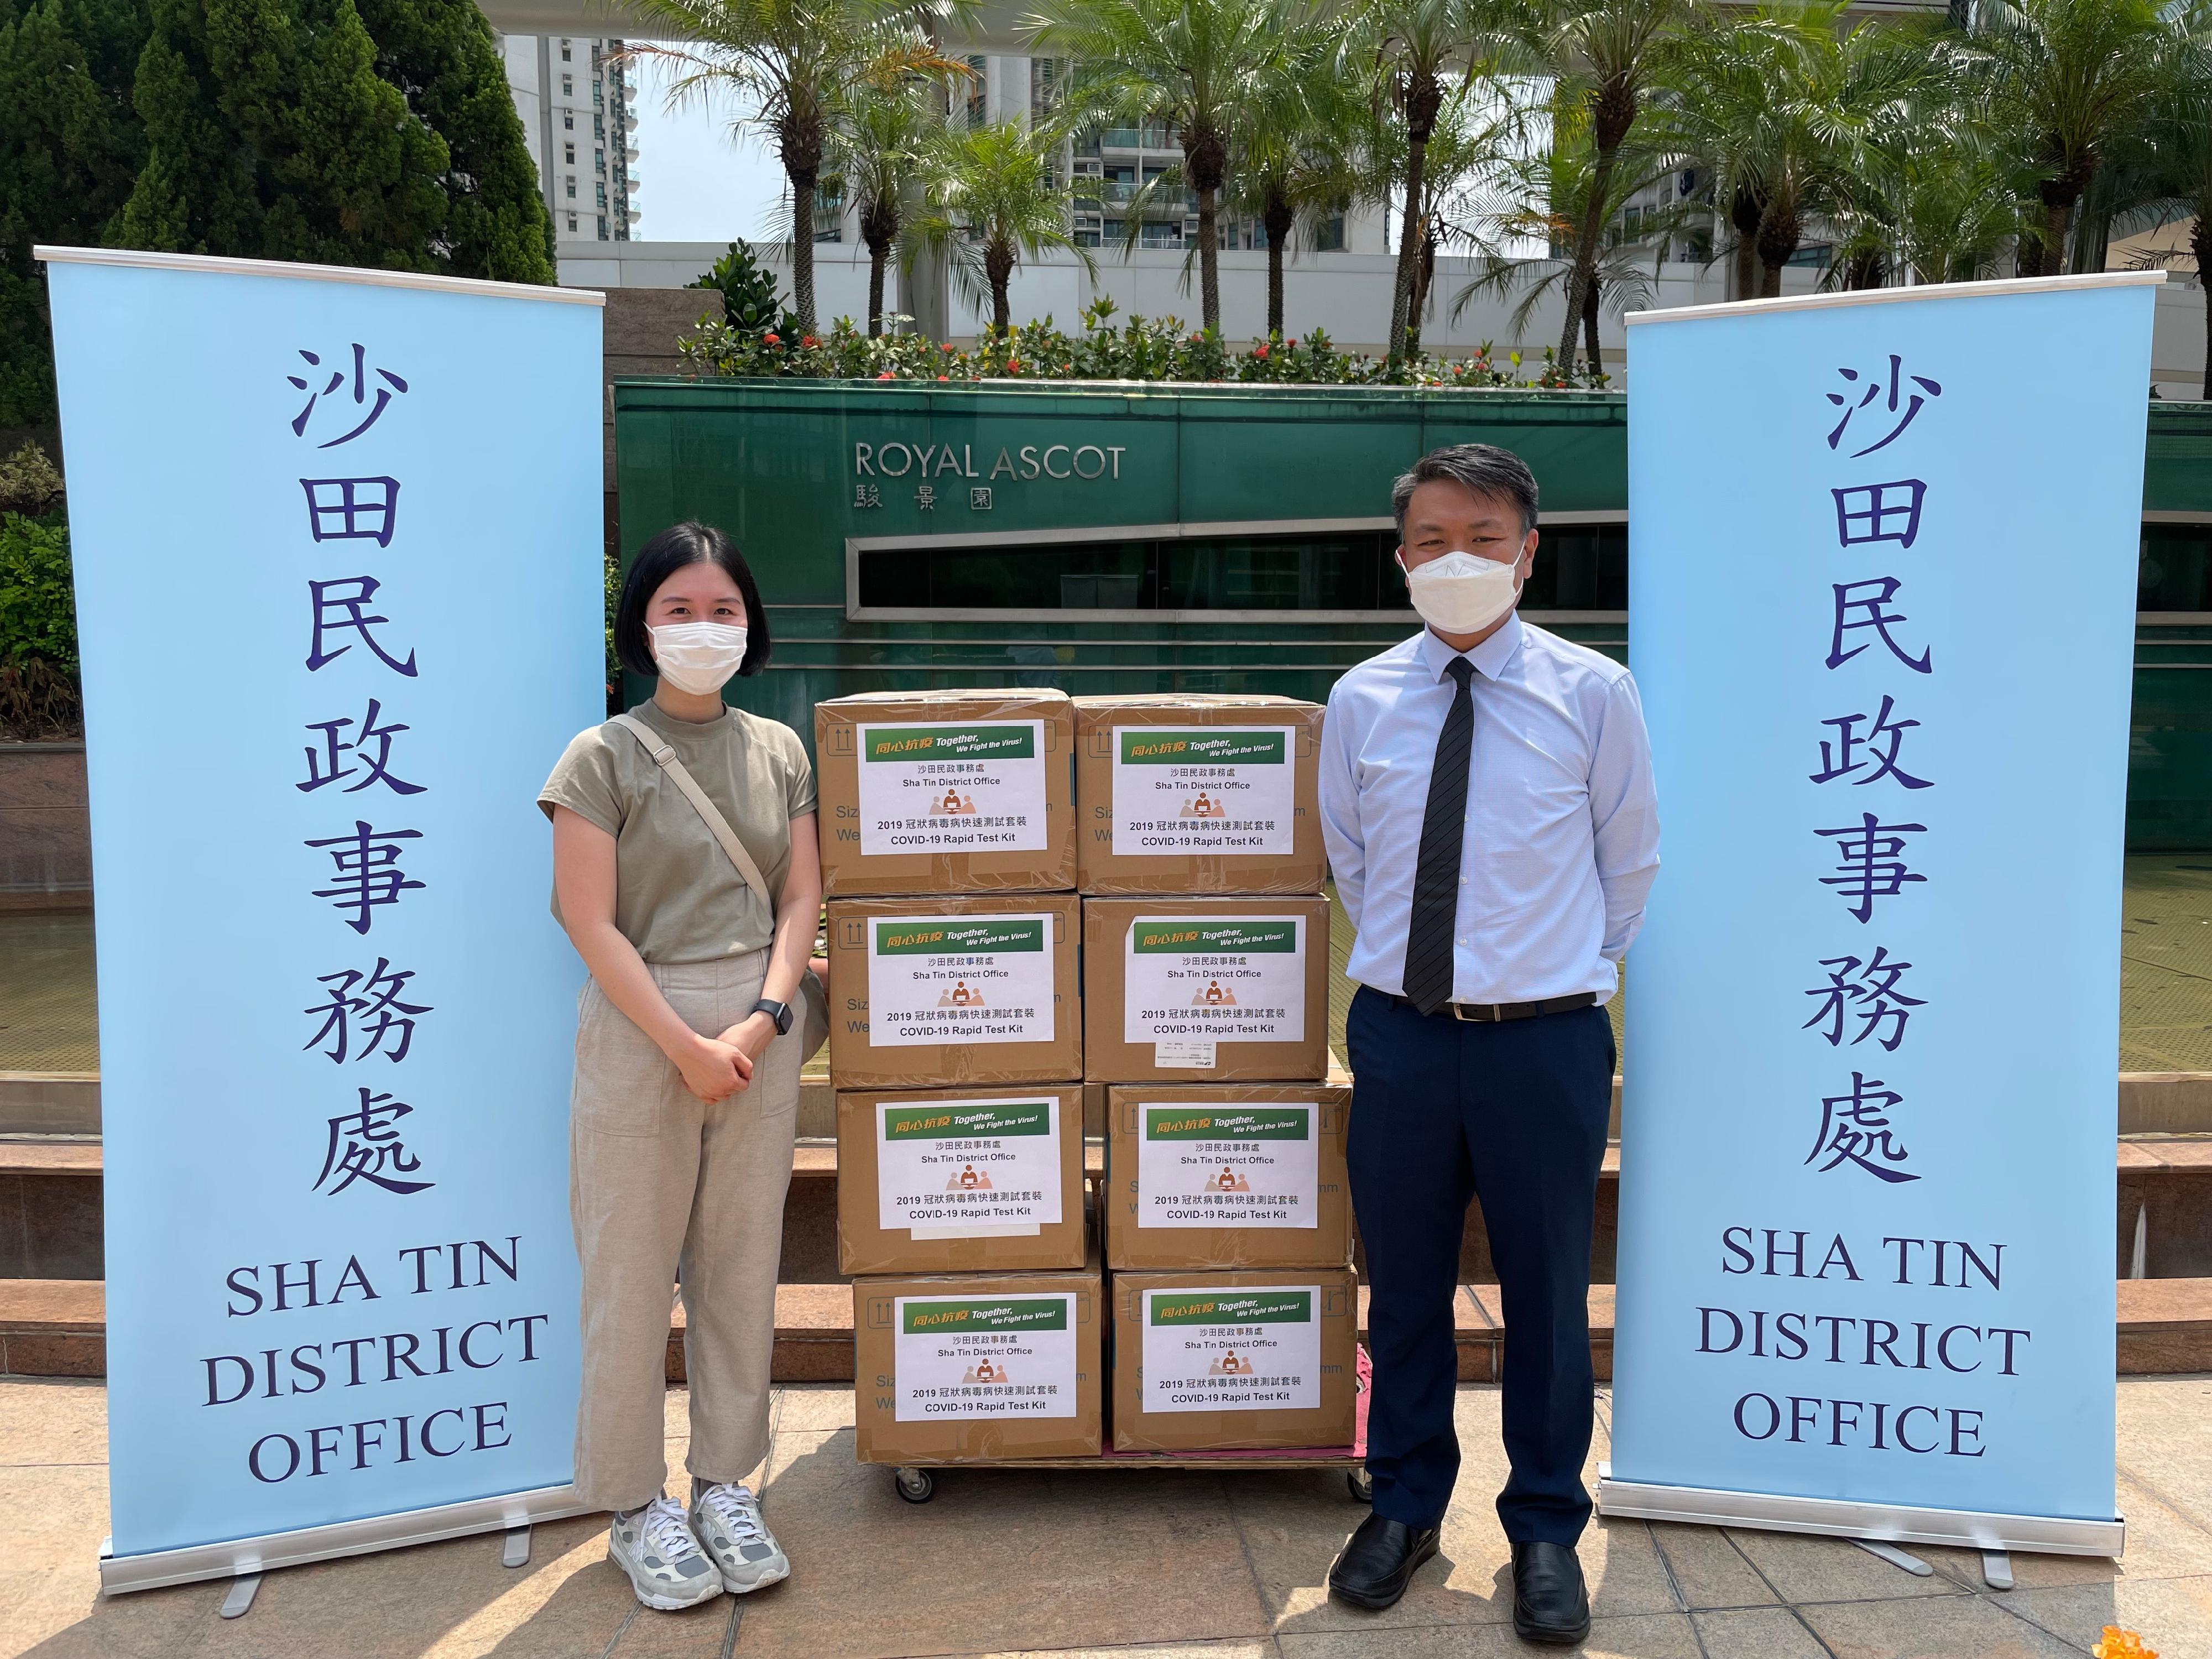 The Sha Tin District Office today (July 29) distributed COVID-19 rapid test kits to households, cleansing workers and property management staff living and working in Royal Ascot for voluntary testing through the property management company.